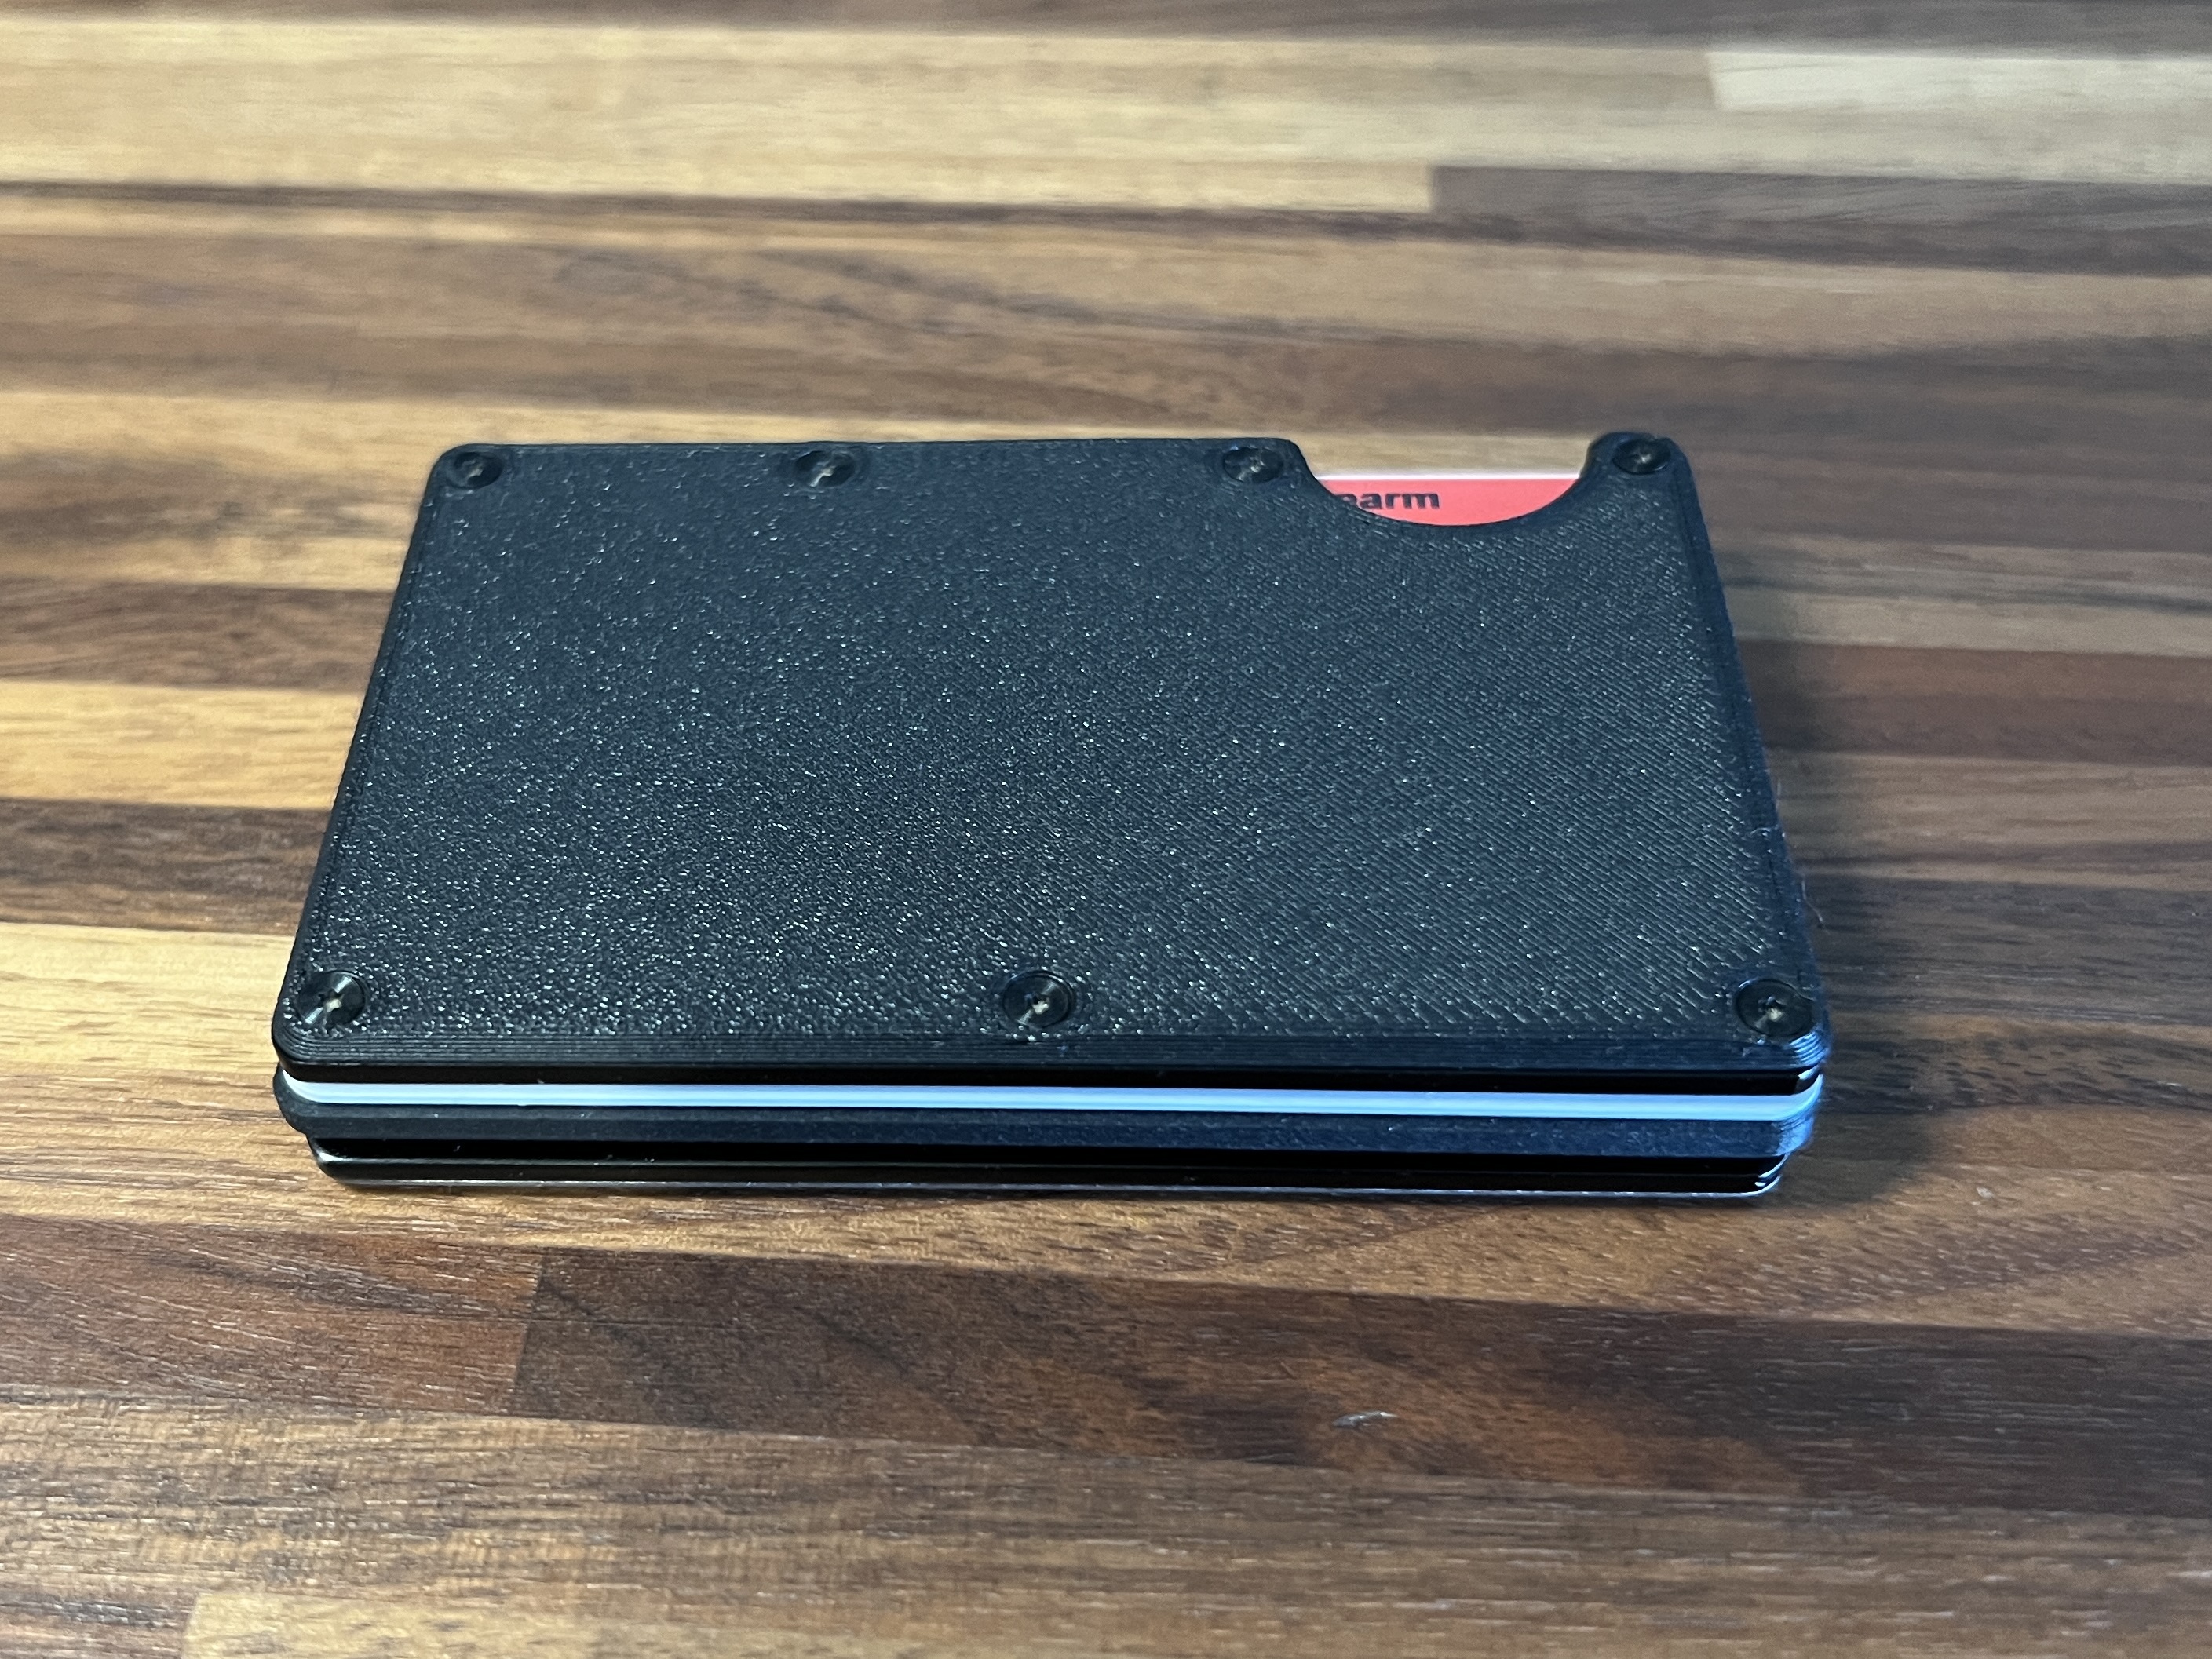 Ridge Wallet MagSafe Plate by Thames